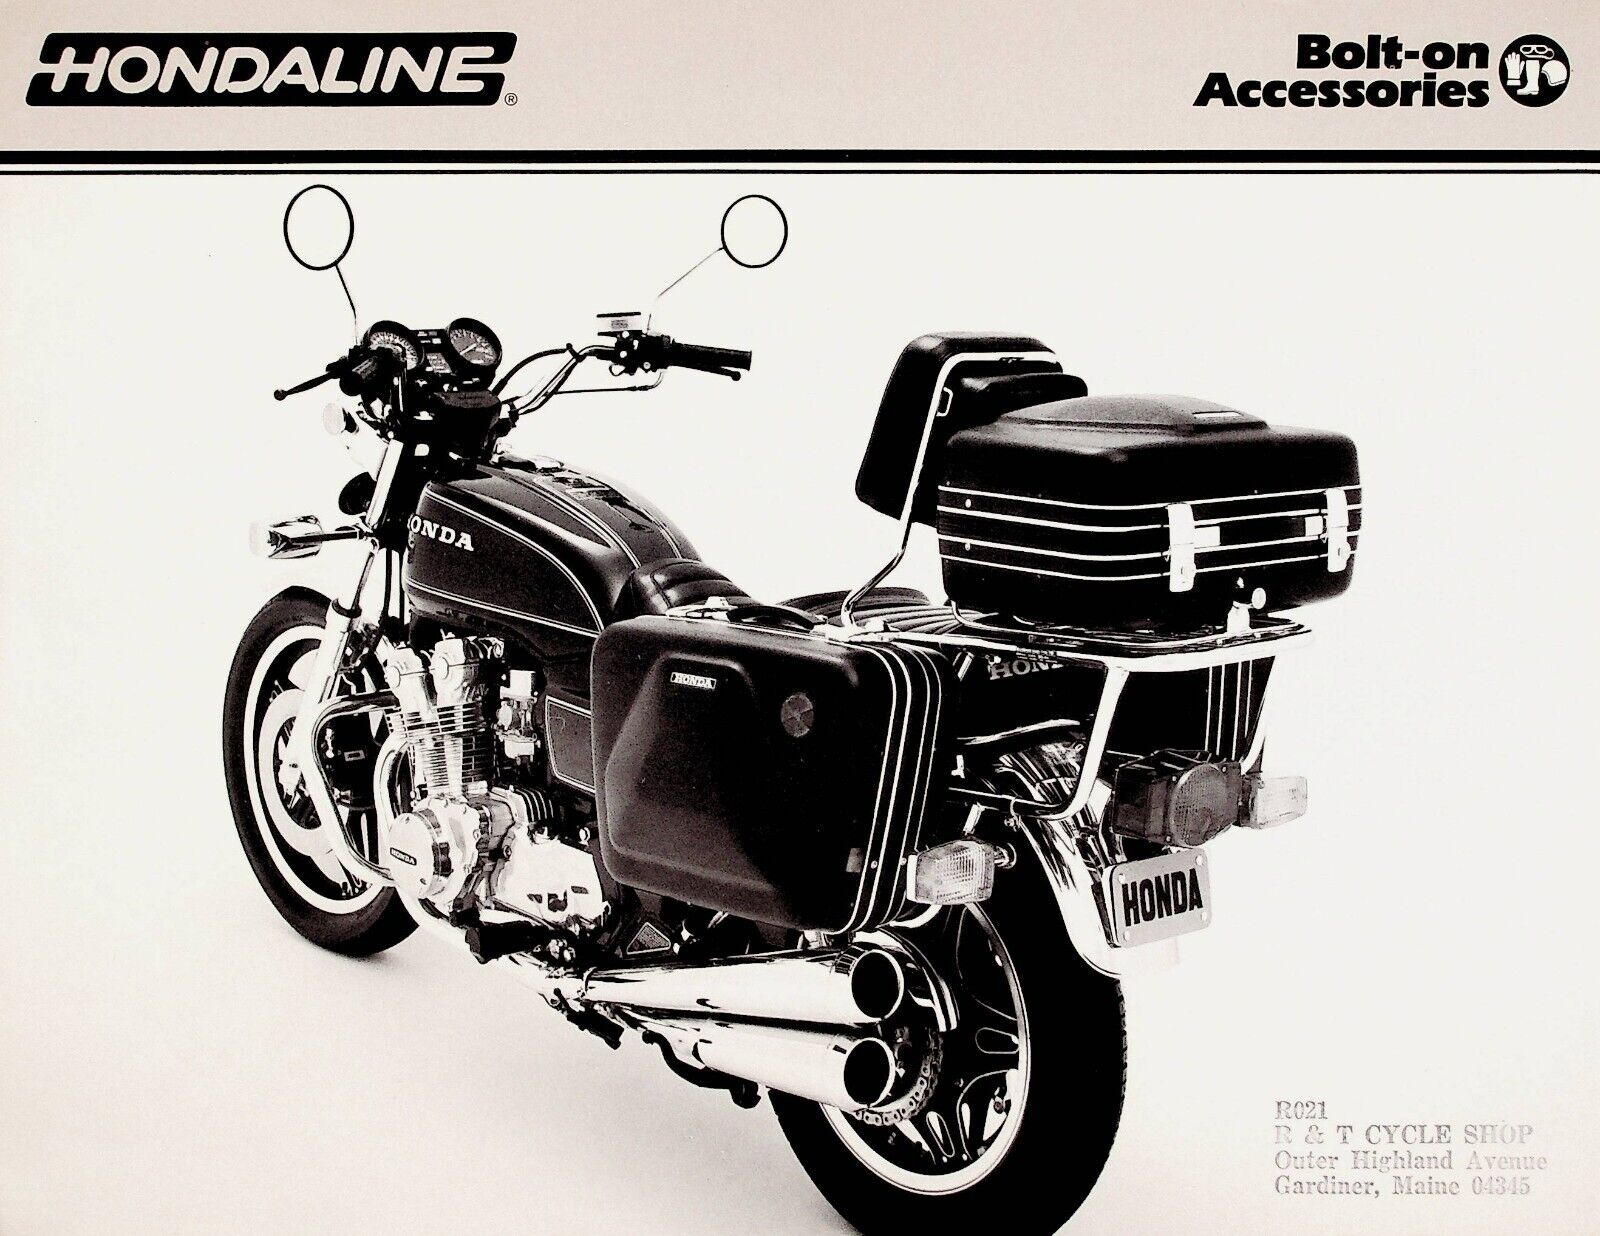 1979 Honda Hondaline Bolt-On Accessories - 2-Page Vintage Motorcycle Ad